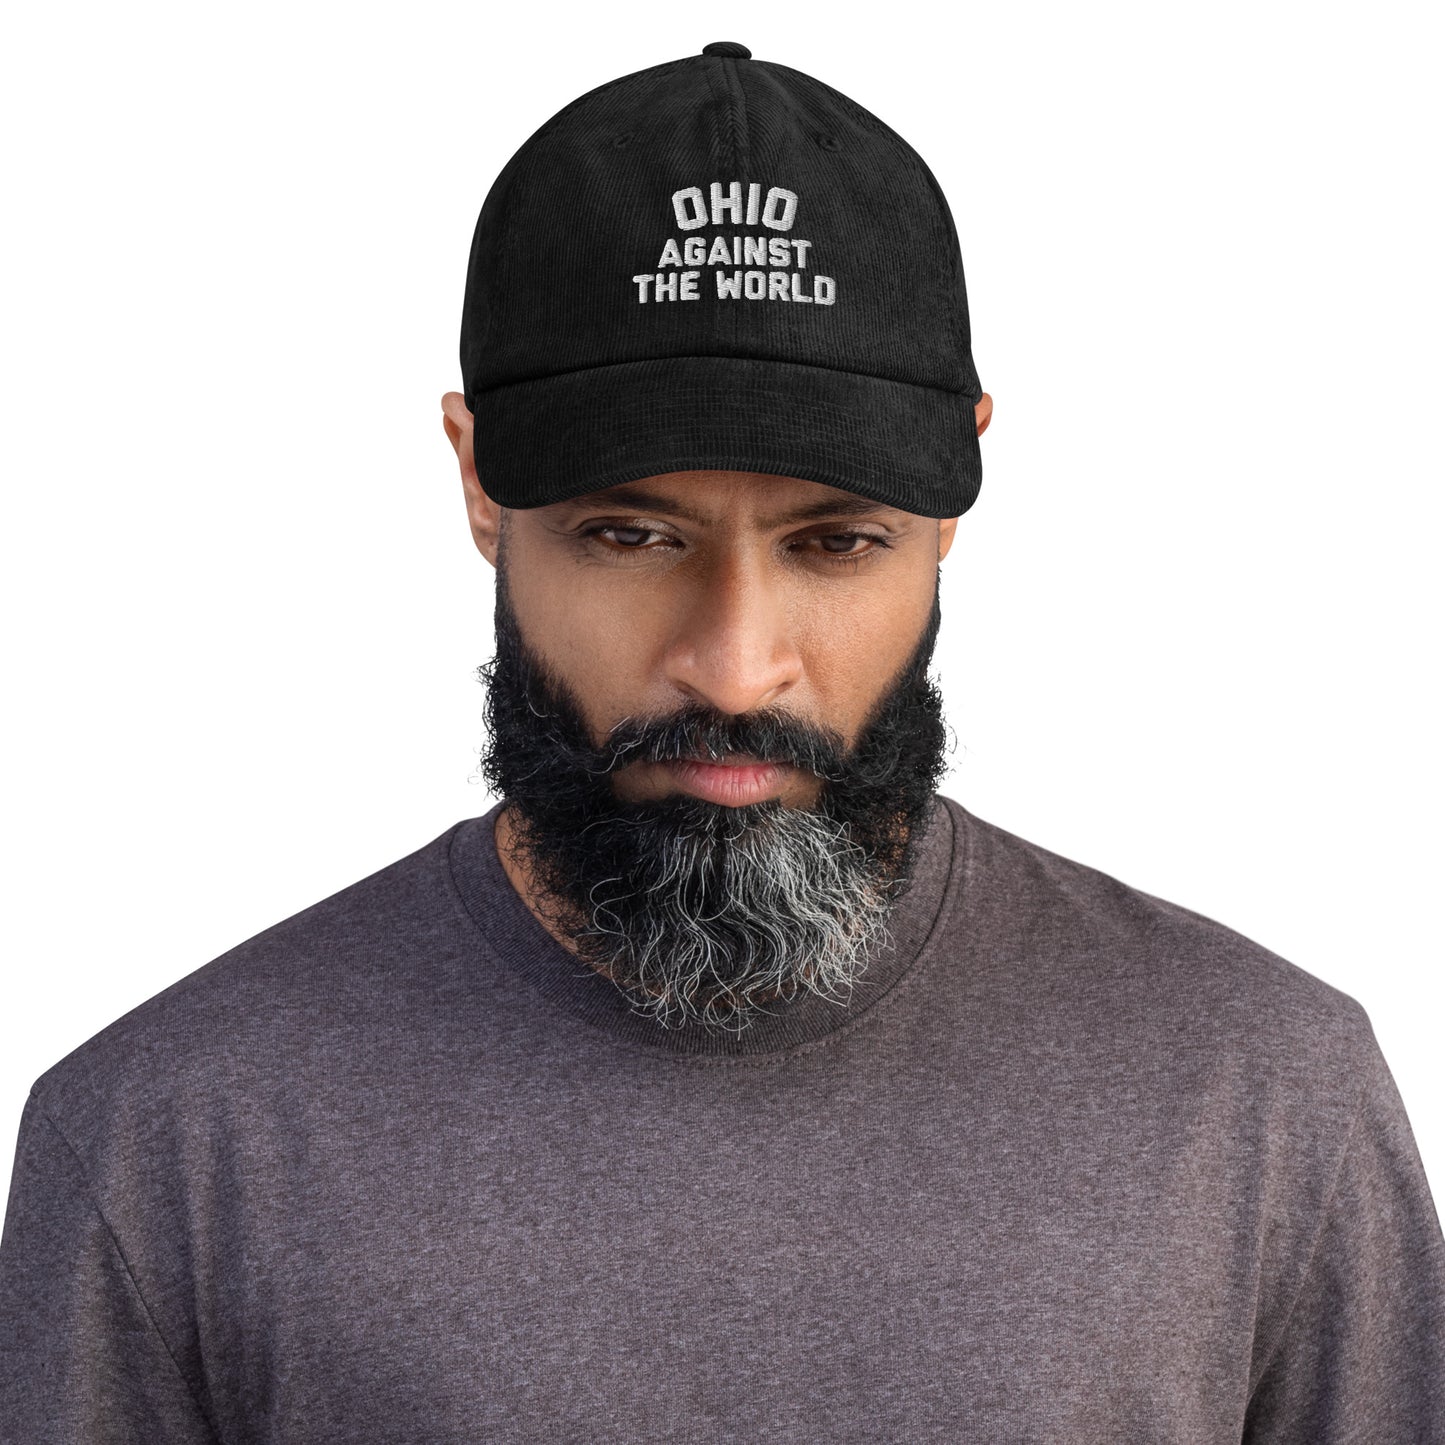 Ohio Against the World Embroidered Corduroy hat